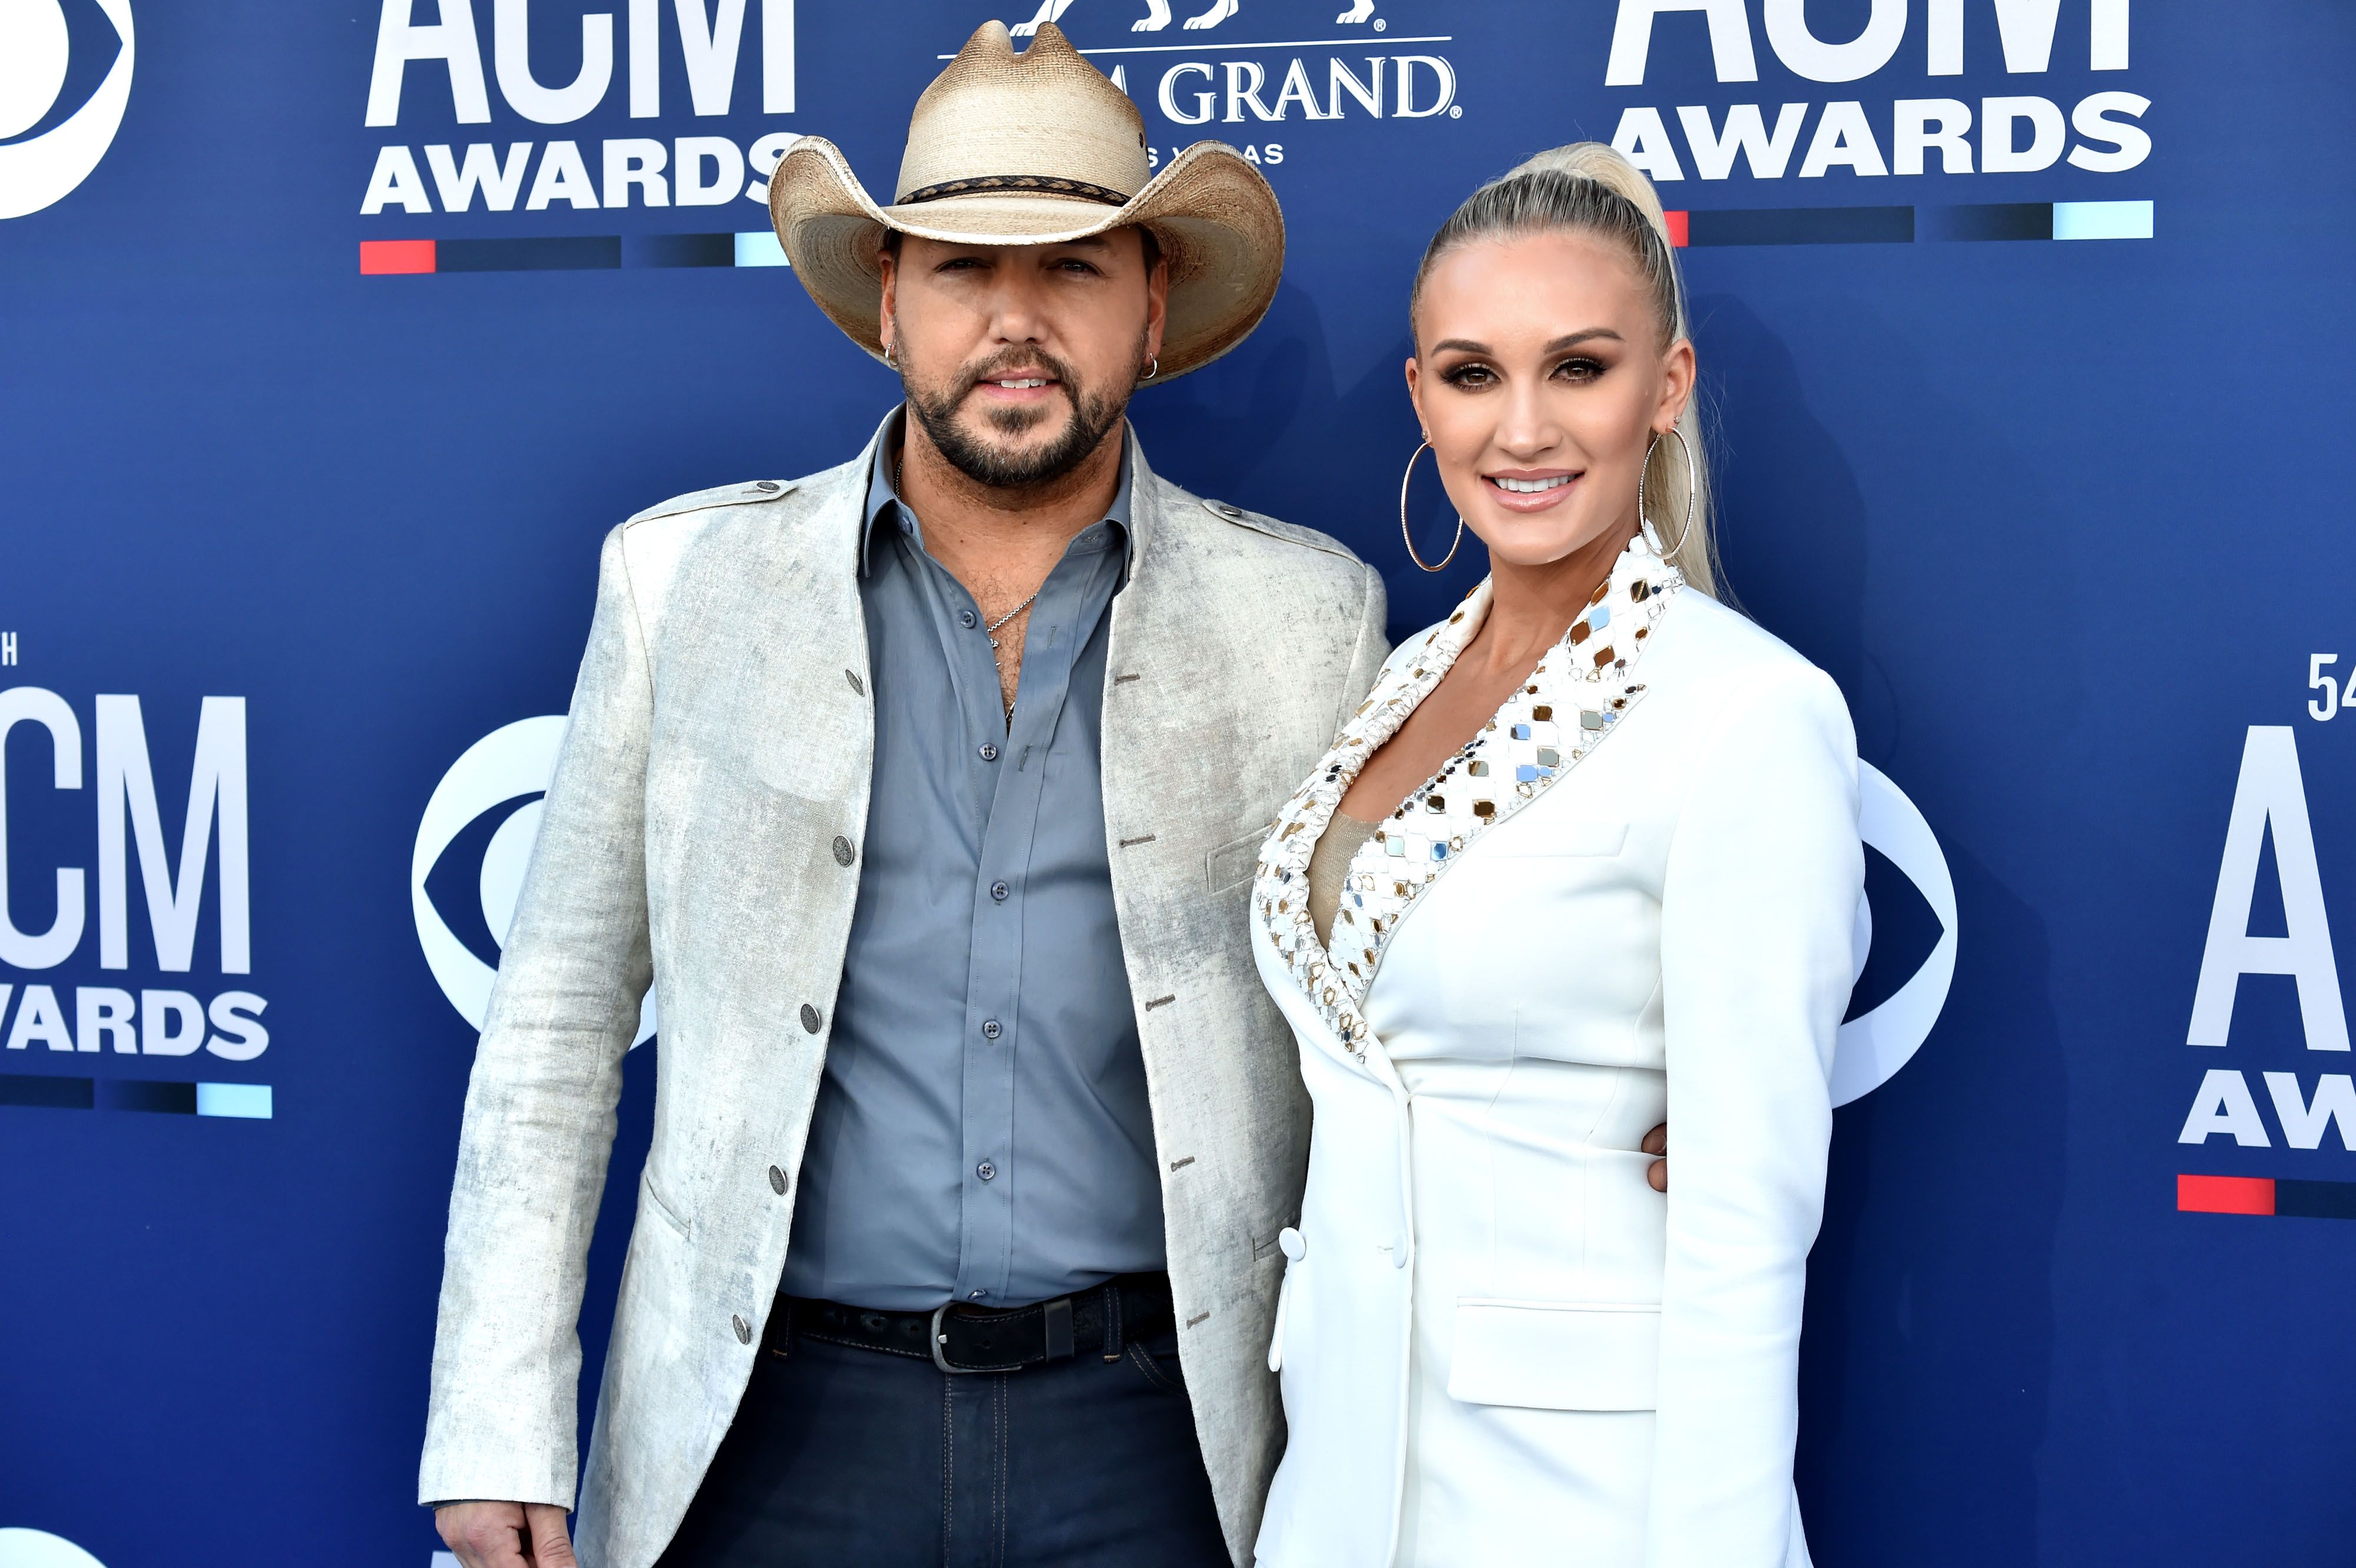 Jason Aldean and Brittany Aldean at the 54th Academy Of Country Music Awards at MGM Grand Hotel & Casino on April 07, 2019 in Las Vegas, Nevada  | Photo: Getty Images 